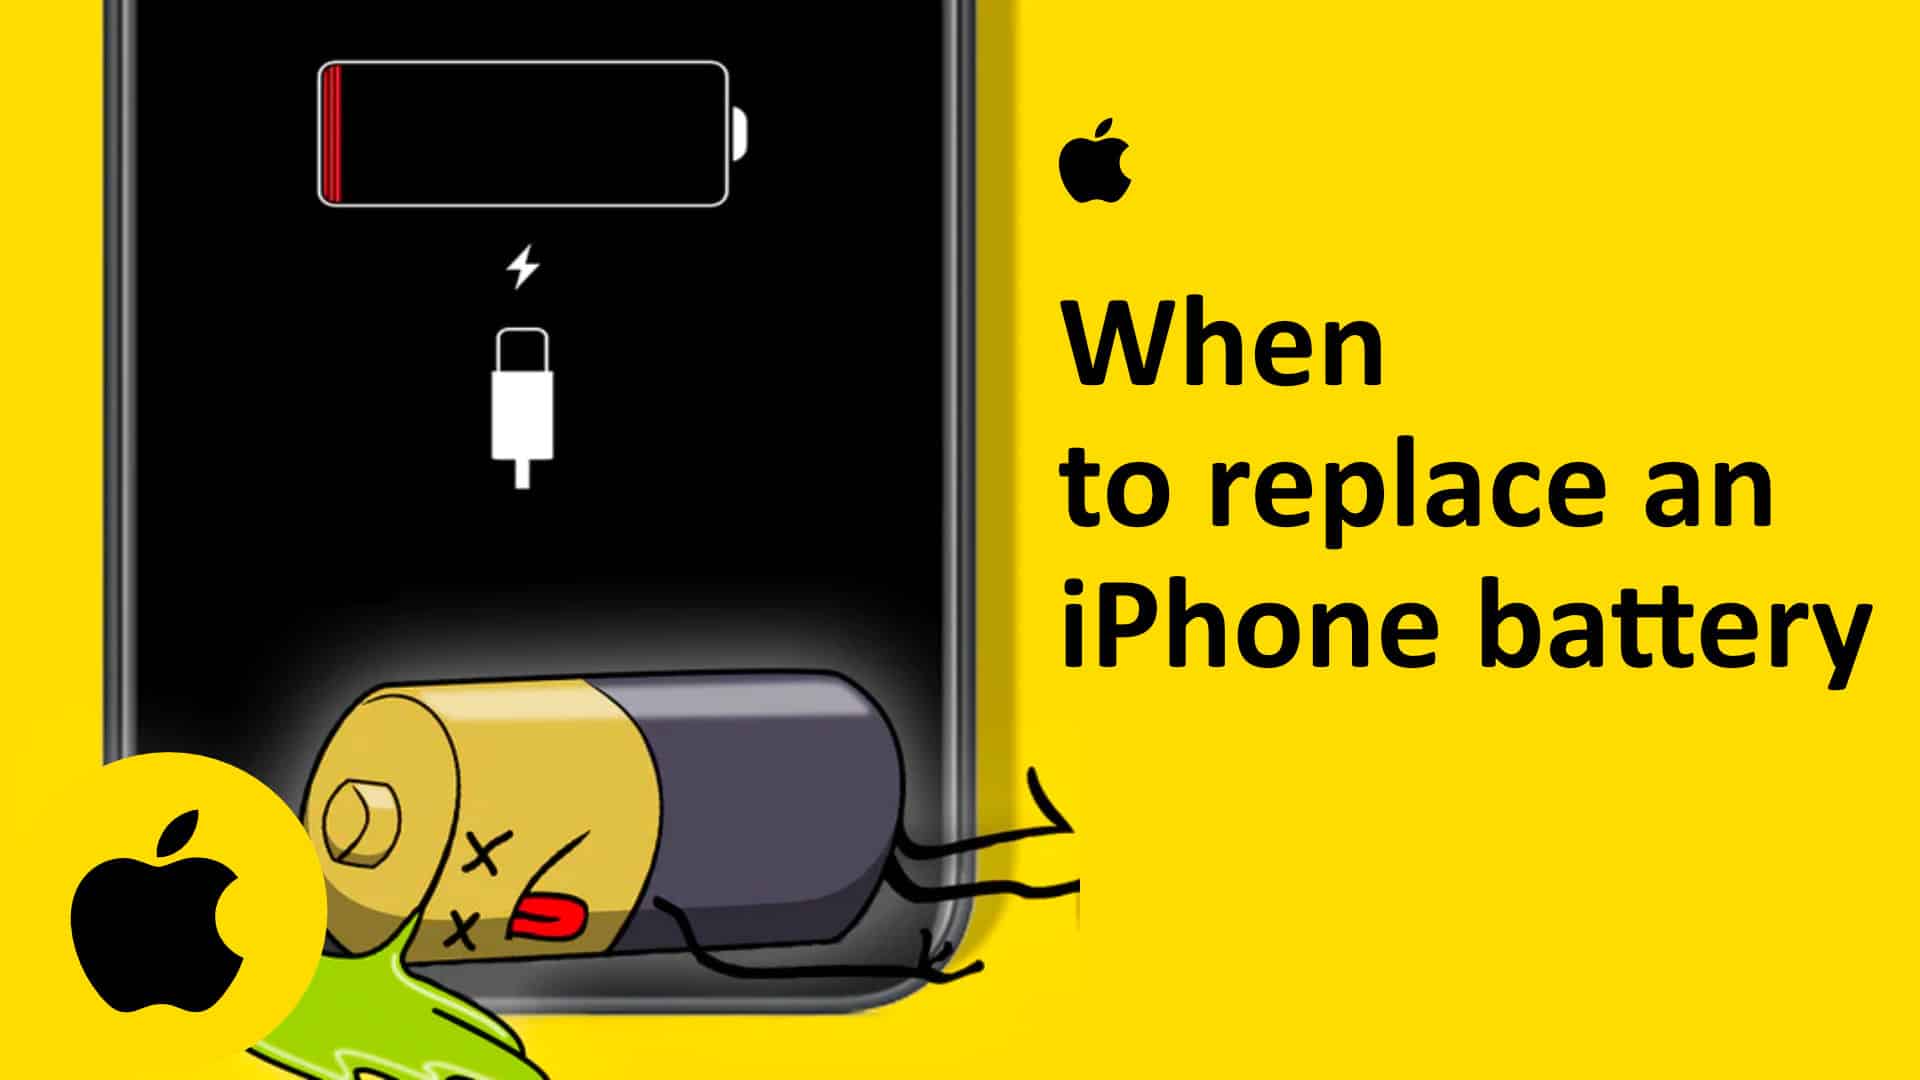 When to replace iphone battery, iphone 6s plus battery lifespan, how long does iphone 5c battery life last, iphone 7 plus battery life draining, iphone 7 poor battery life, why is my iphone battery draining when not in use, when to replace iphone se battery, fix battery health iphone, iphone xs max battery life issues, iphone x battery life issues iphone x poor battery life iphone x battery life draining fast iphone 8 battery life problem iphone 8 plus battery life issues, iphone 8 poor battery life iphone 8 battery life draining faste battery lifespan